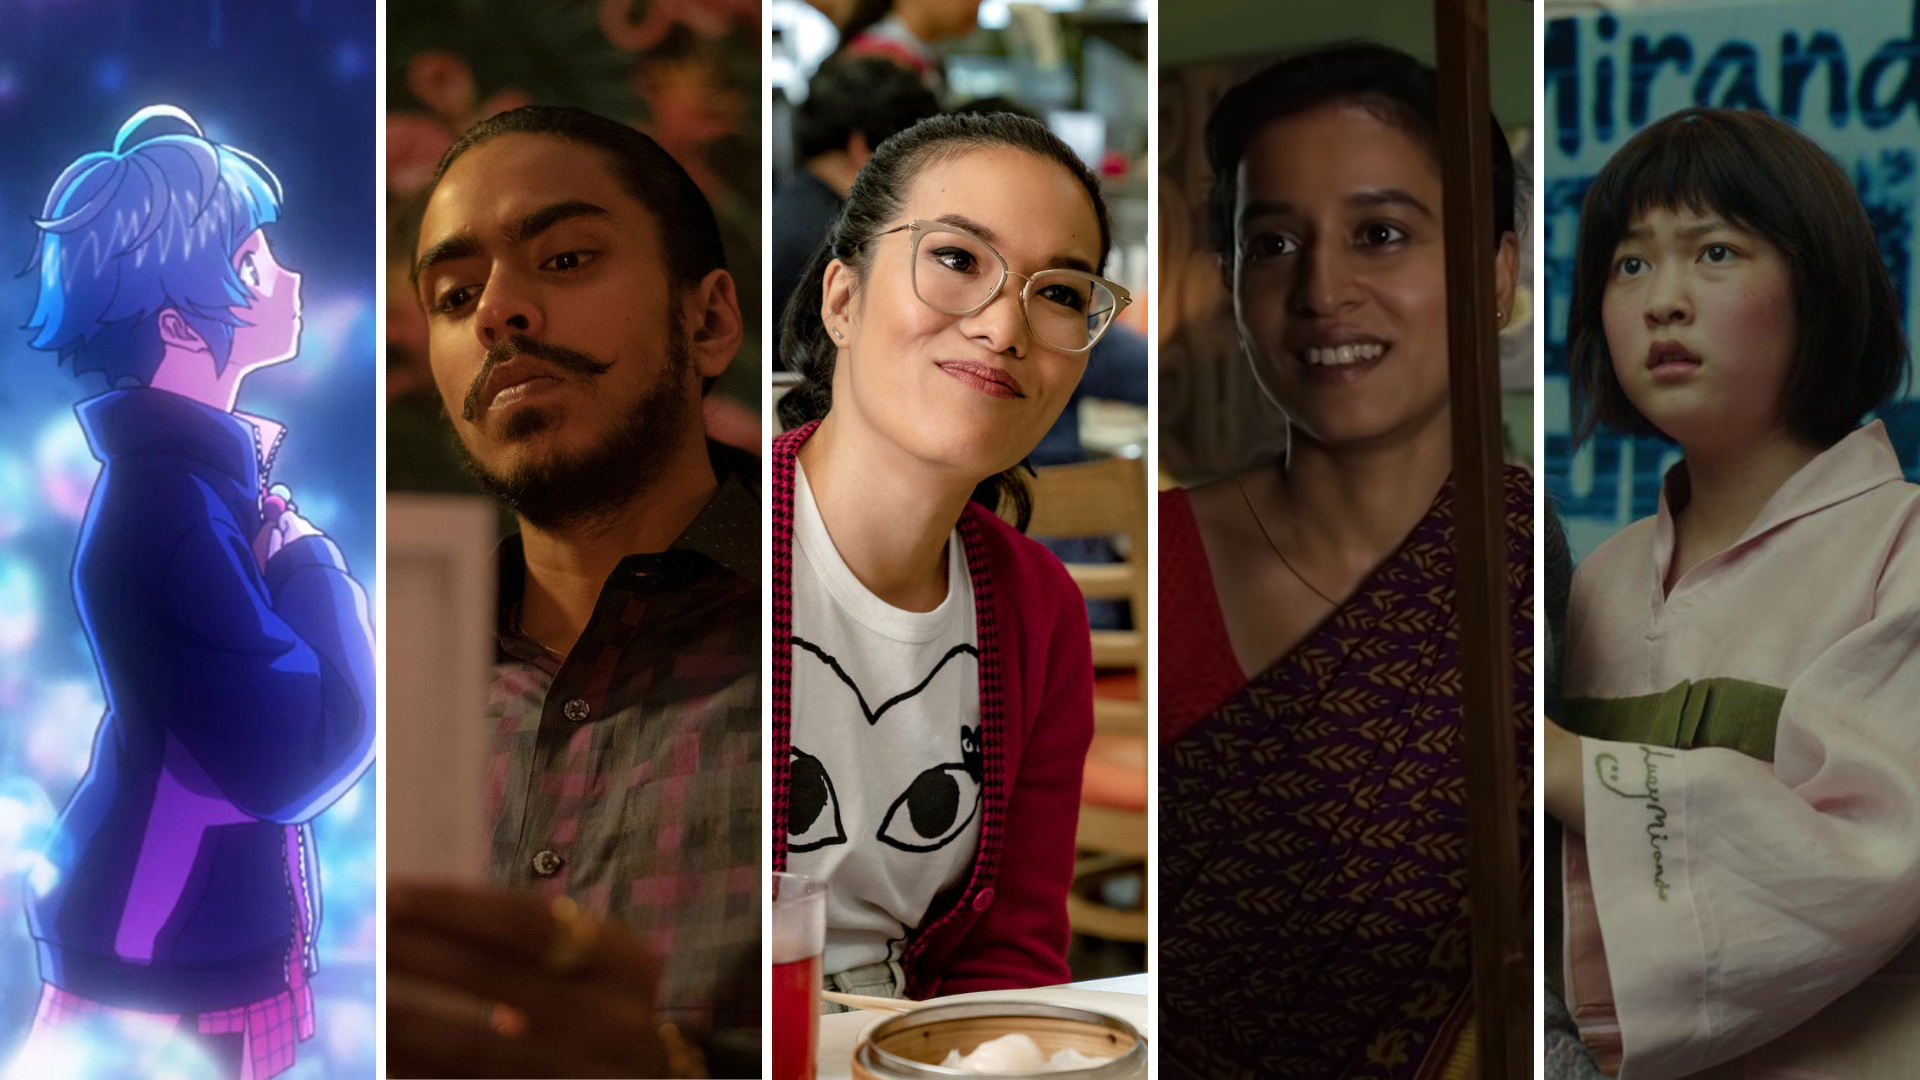 Five images from Netflix films made by Asian creators